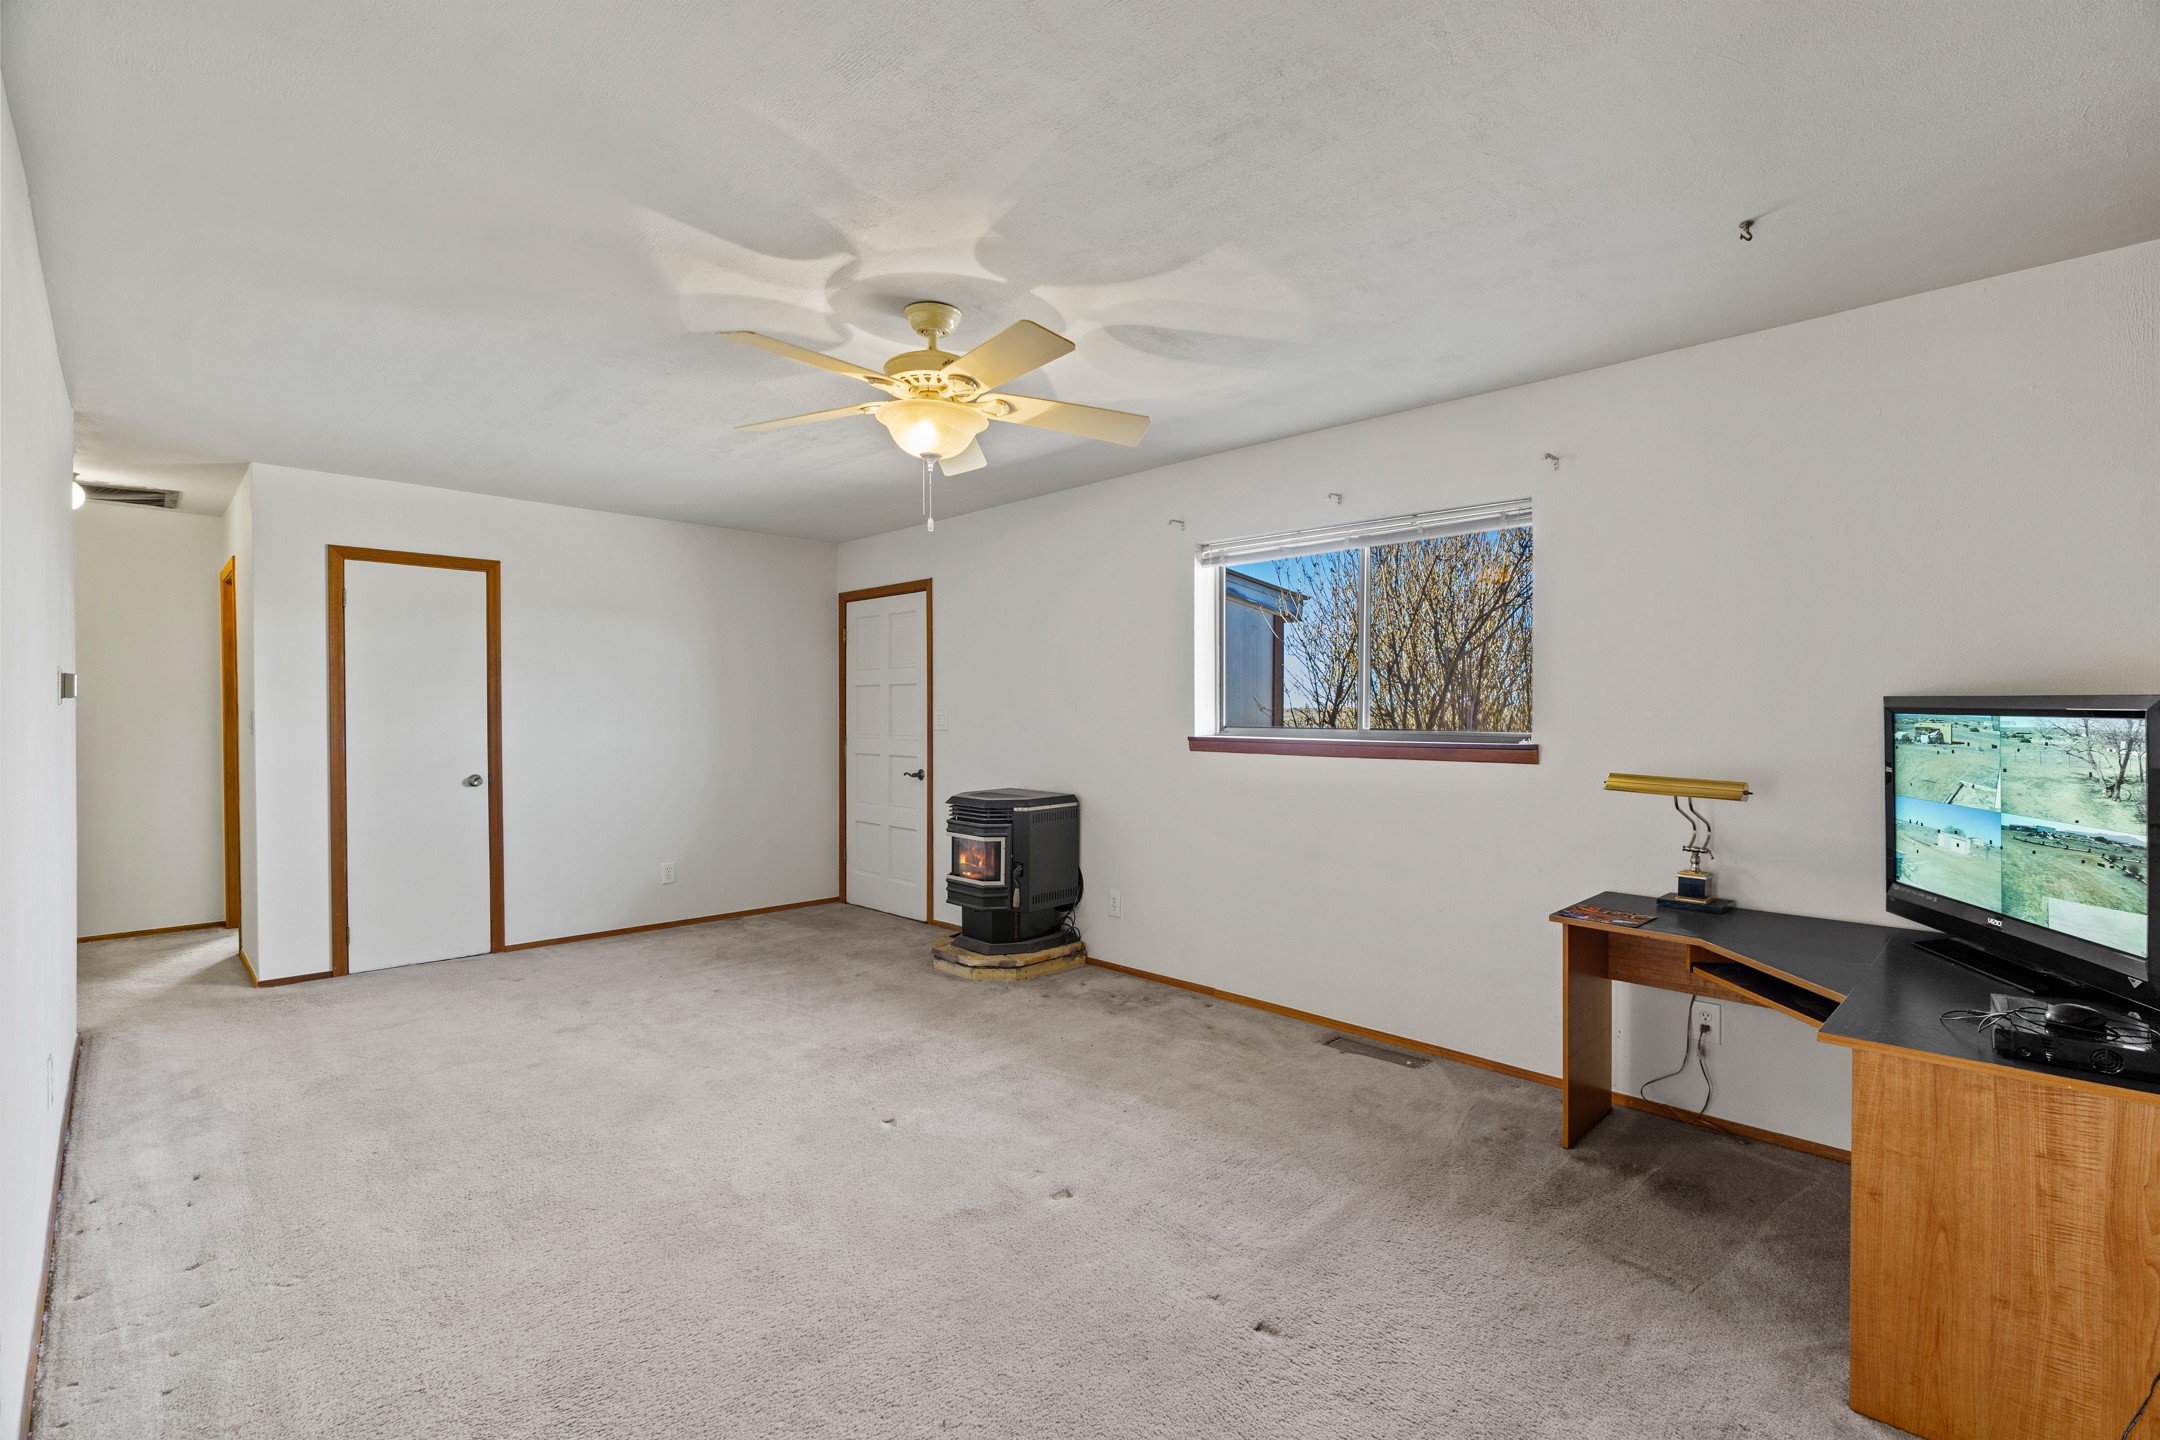 44 Willow Branch, Santa Fe, New Mexico 87508, 2 Bedrooms Bedrooms, ,2 BathroomsBathrooms,Residential,For Sale,44 Willow Branch,202401406